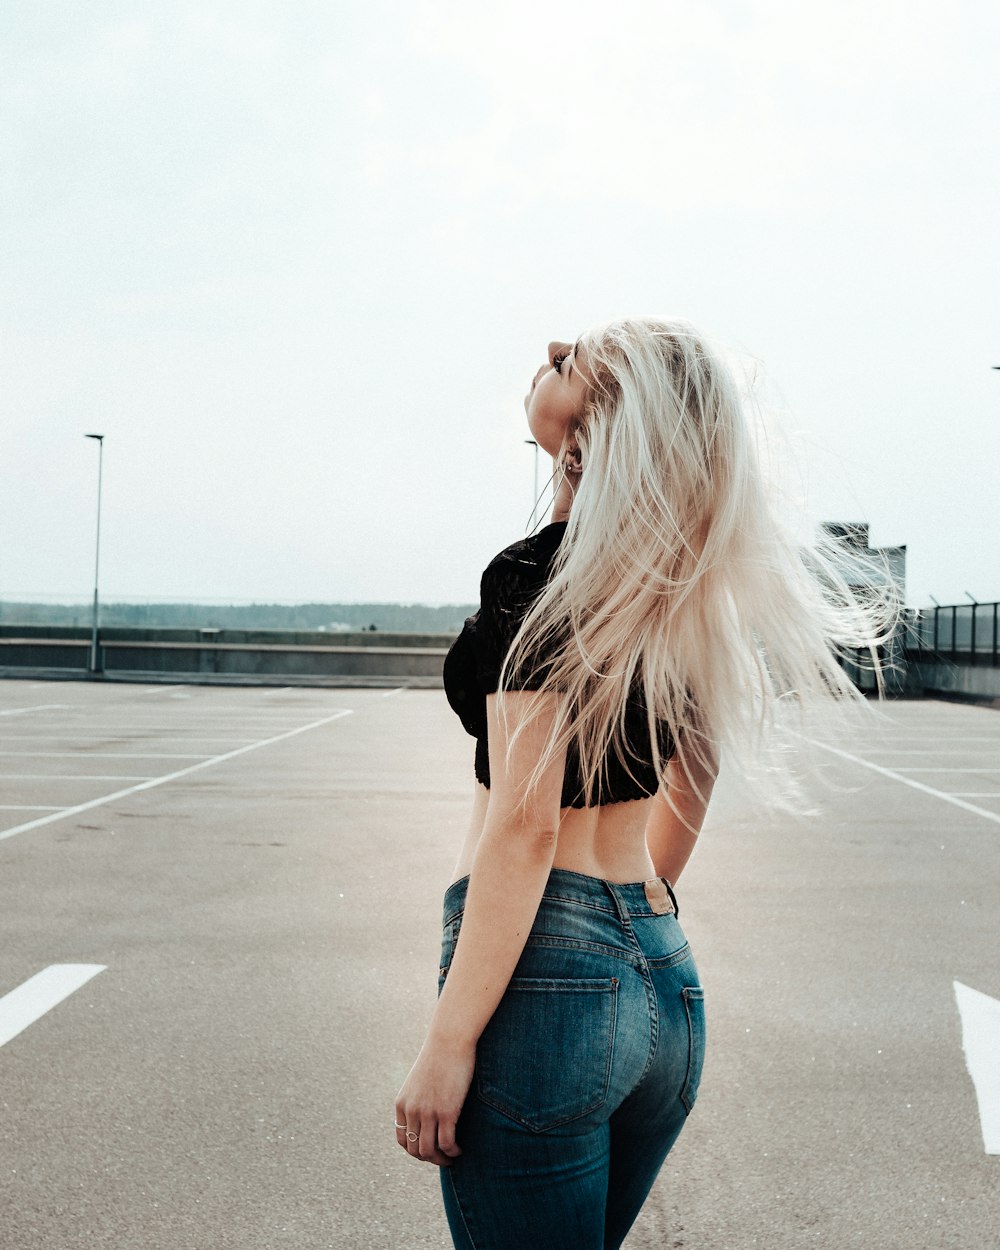 woman wearing black crop top and blue jeans